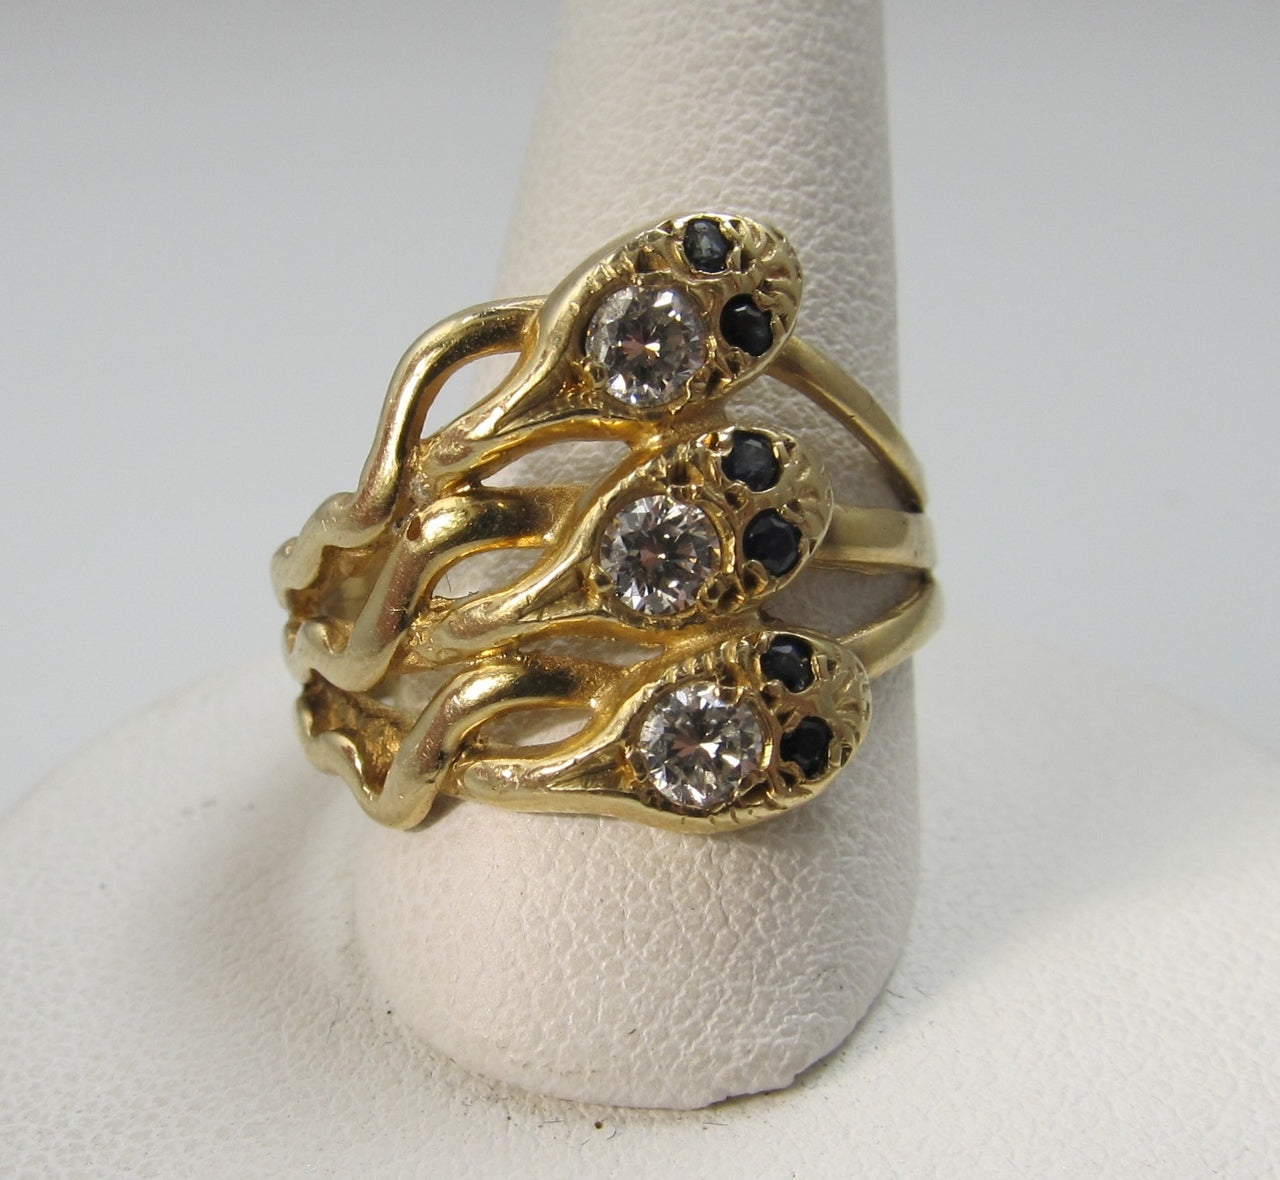 Vintage 14k gold snake ring, victorious cape may